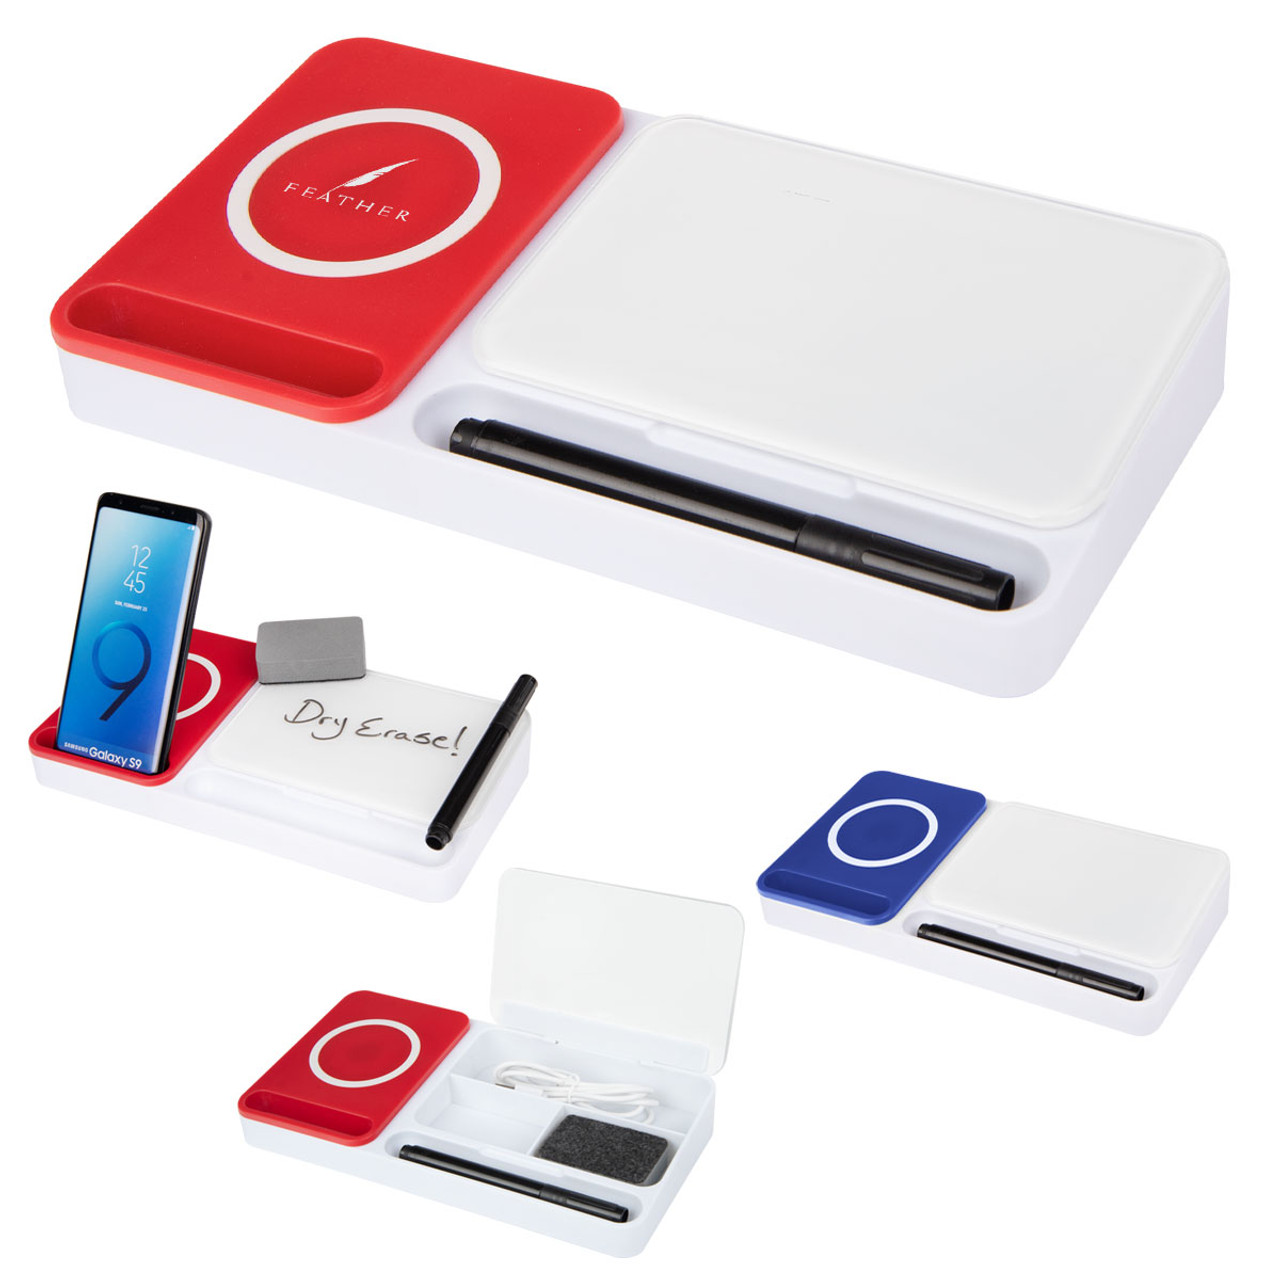 Custom Desk Organizer With Wireless Charger & Dry Erase Board 25882